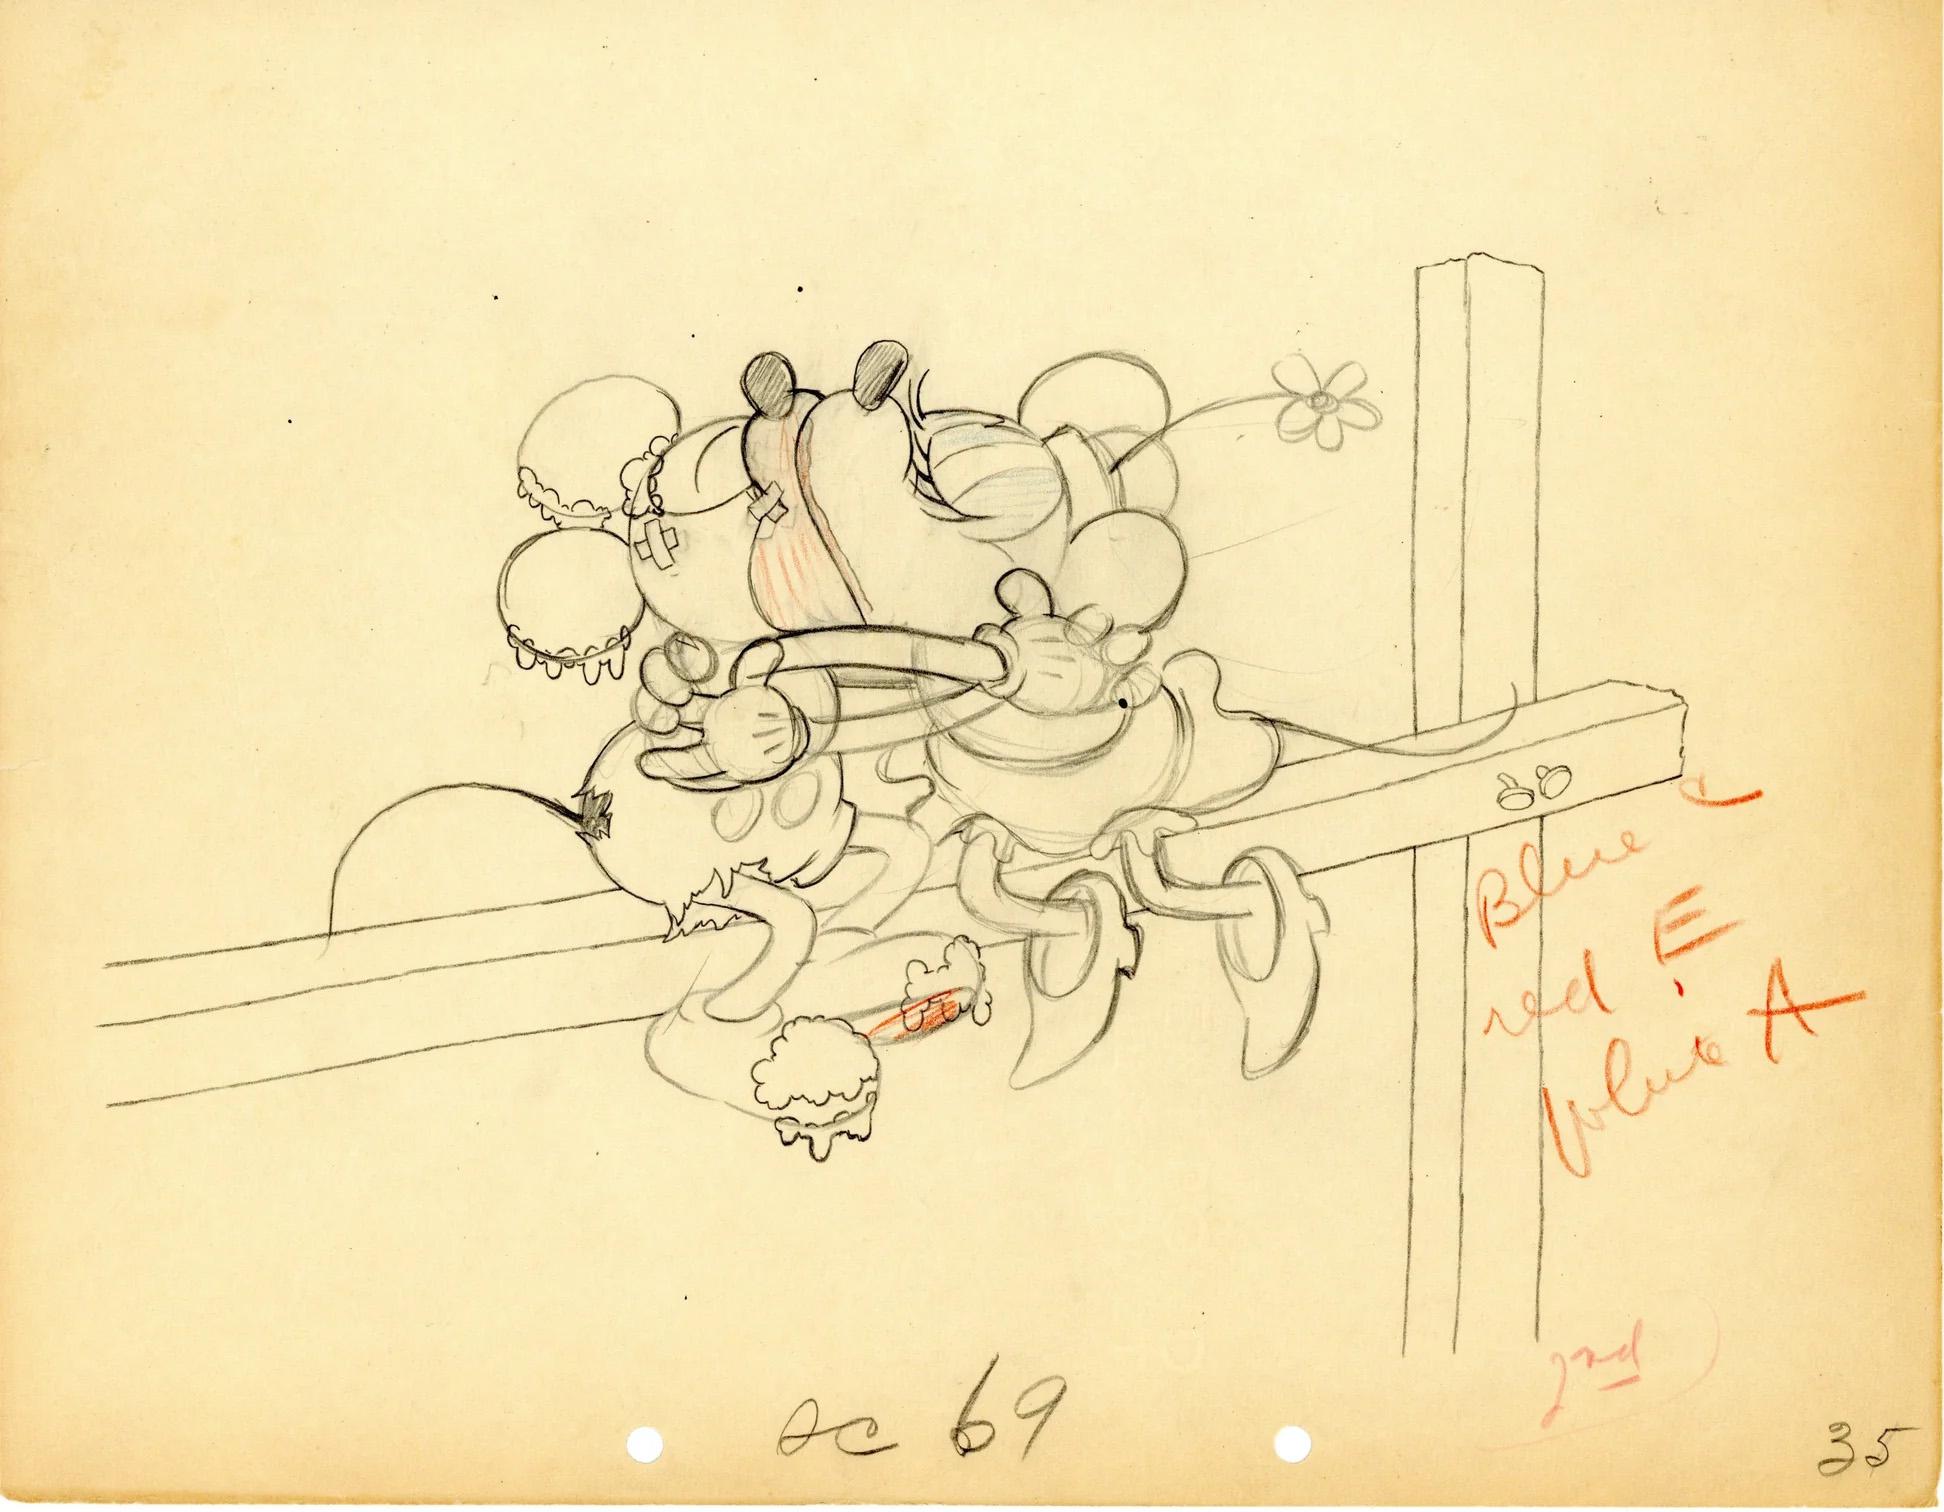 Touchdown Mickey Original Production Drawing: Mickey Mouse and Minnie Mouse - Art by Walt Disney Studio Artists